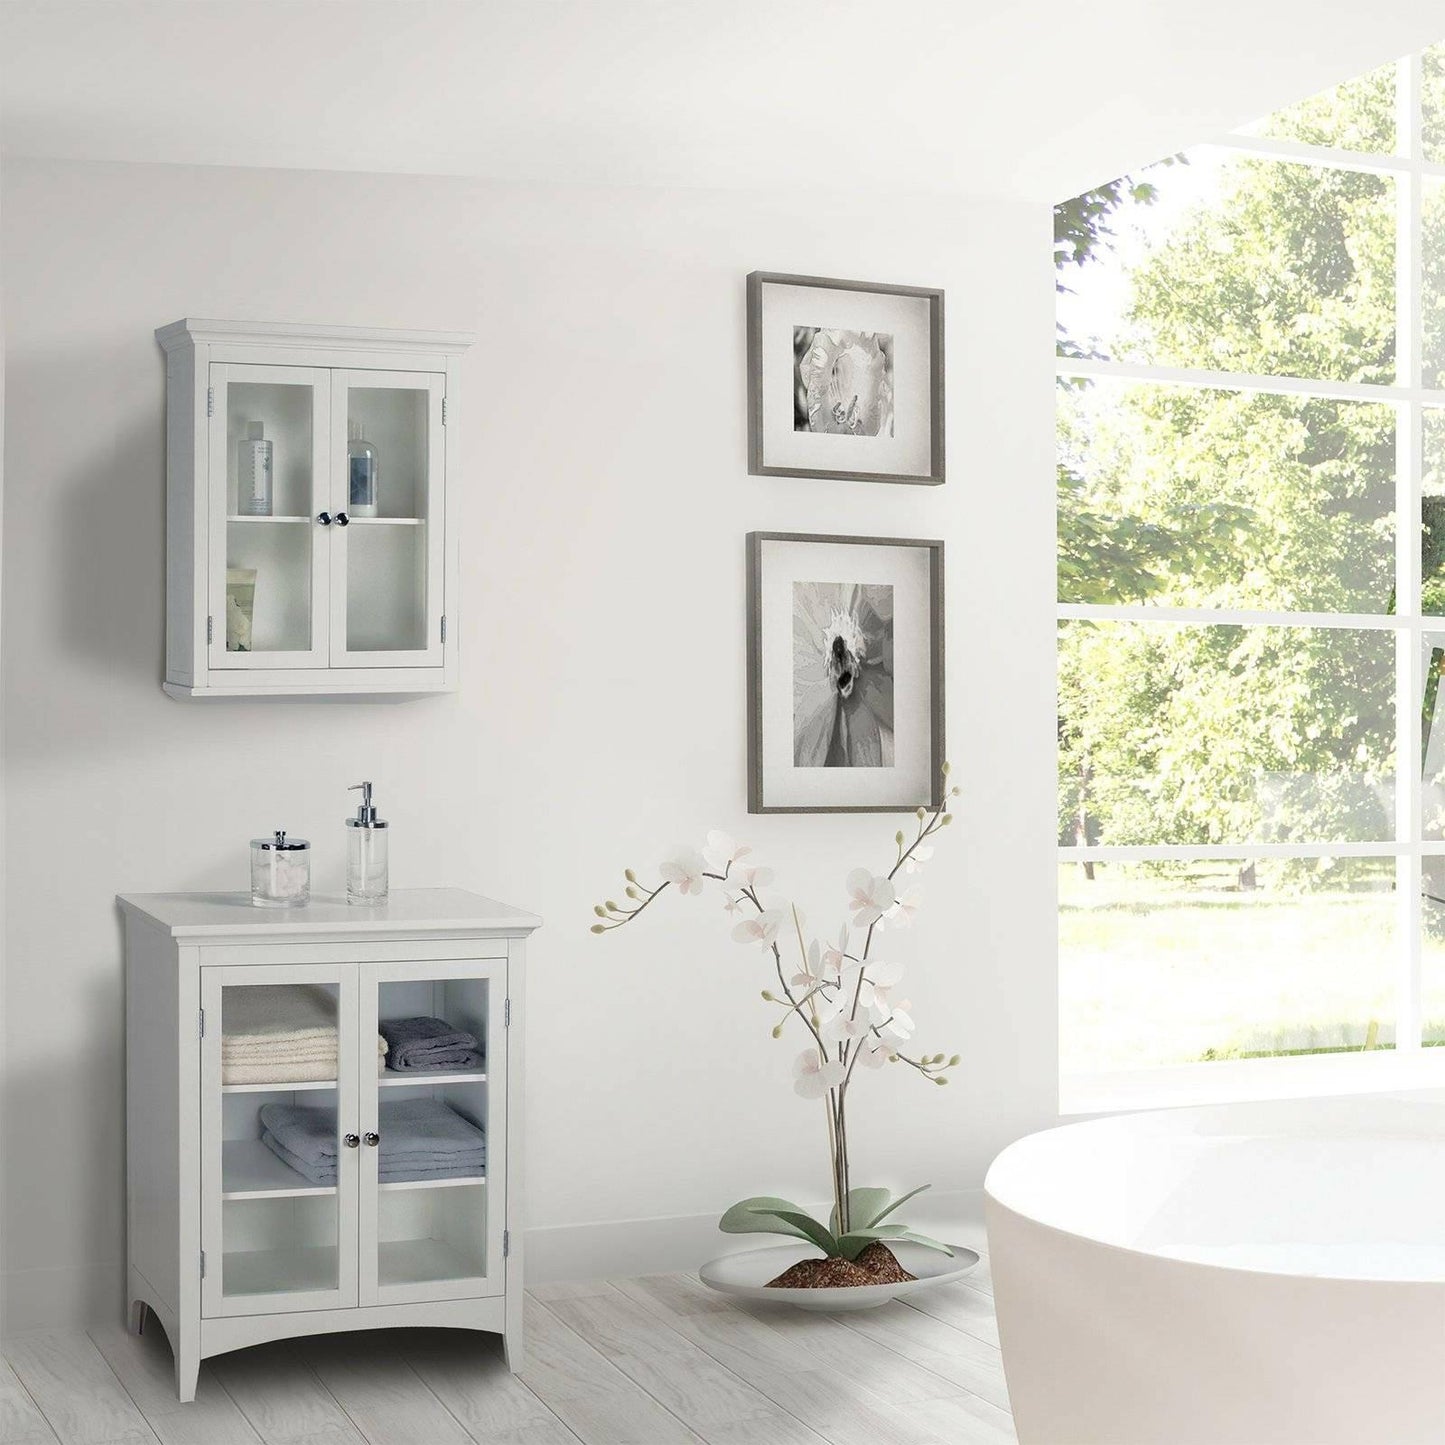 Classic 2-Door Bathroom Wall Cabinet in White Finish - FurniFindUSA